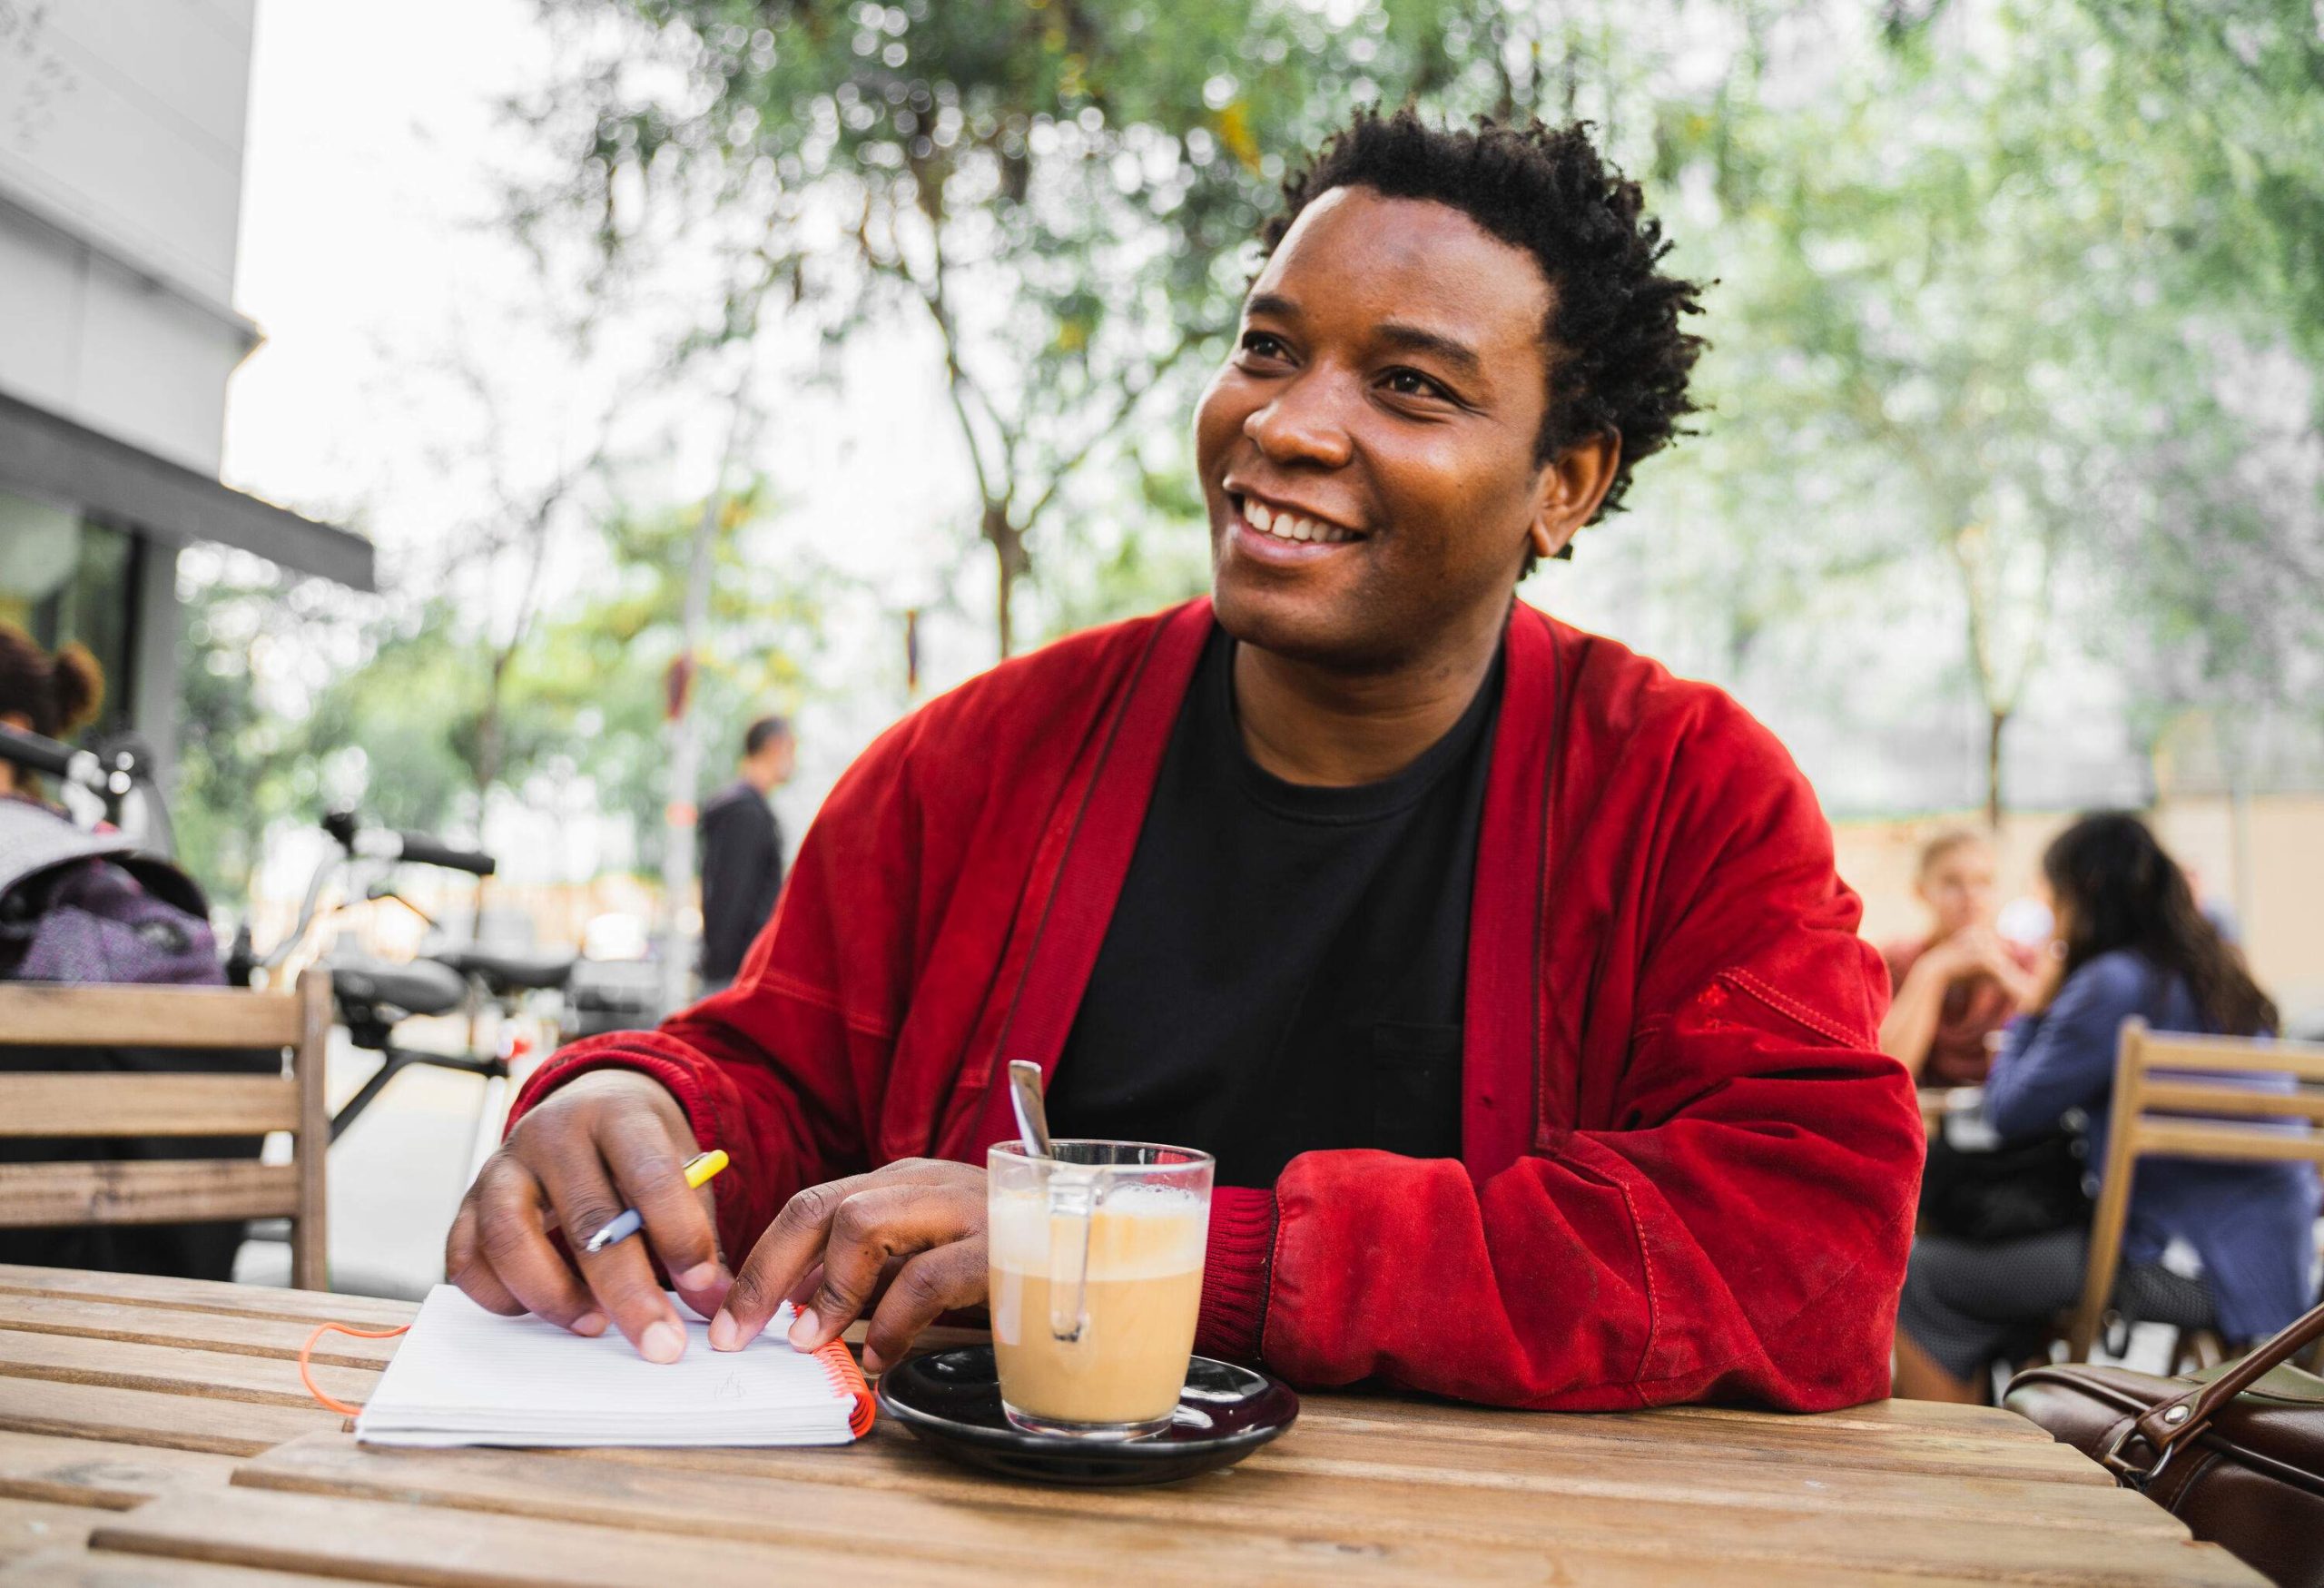 A smiling man in a red jacket holding a pen and a notebook on a table next to a cup of coffee.